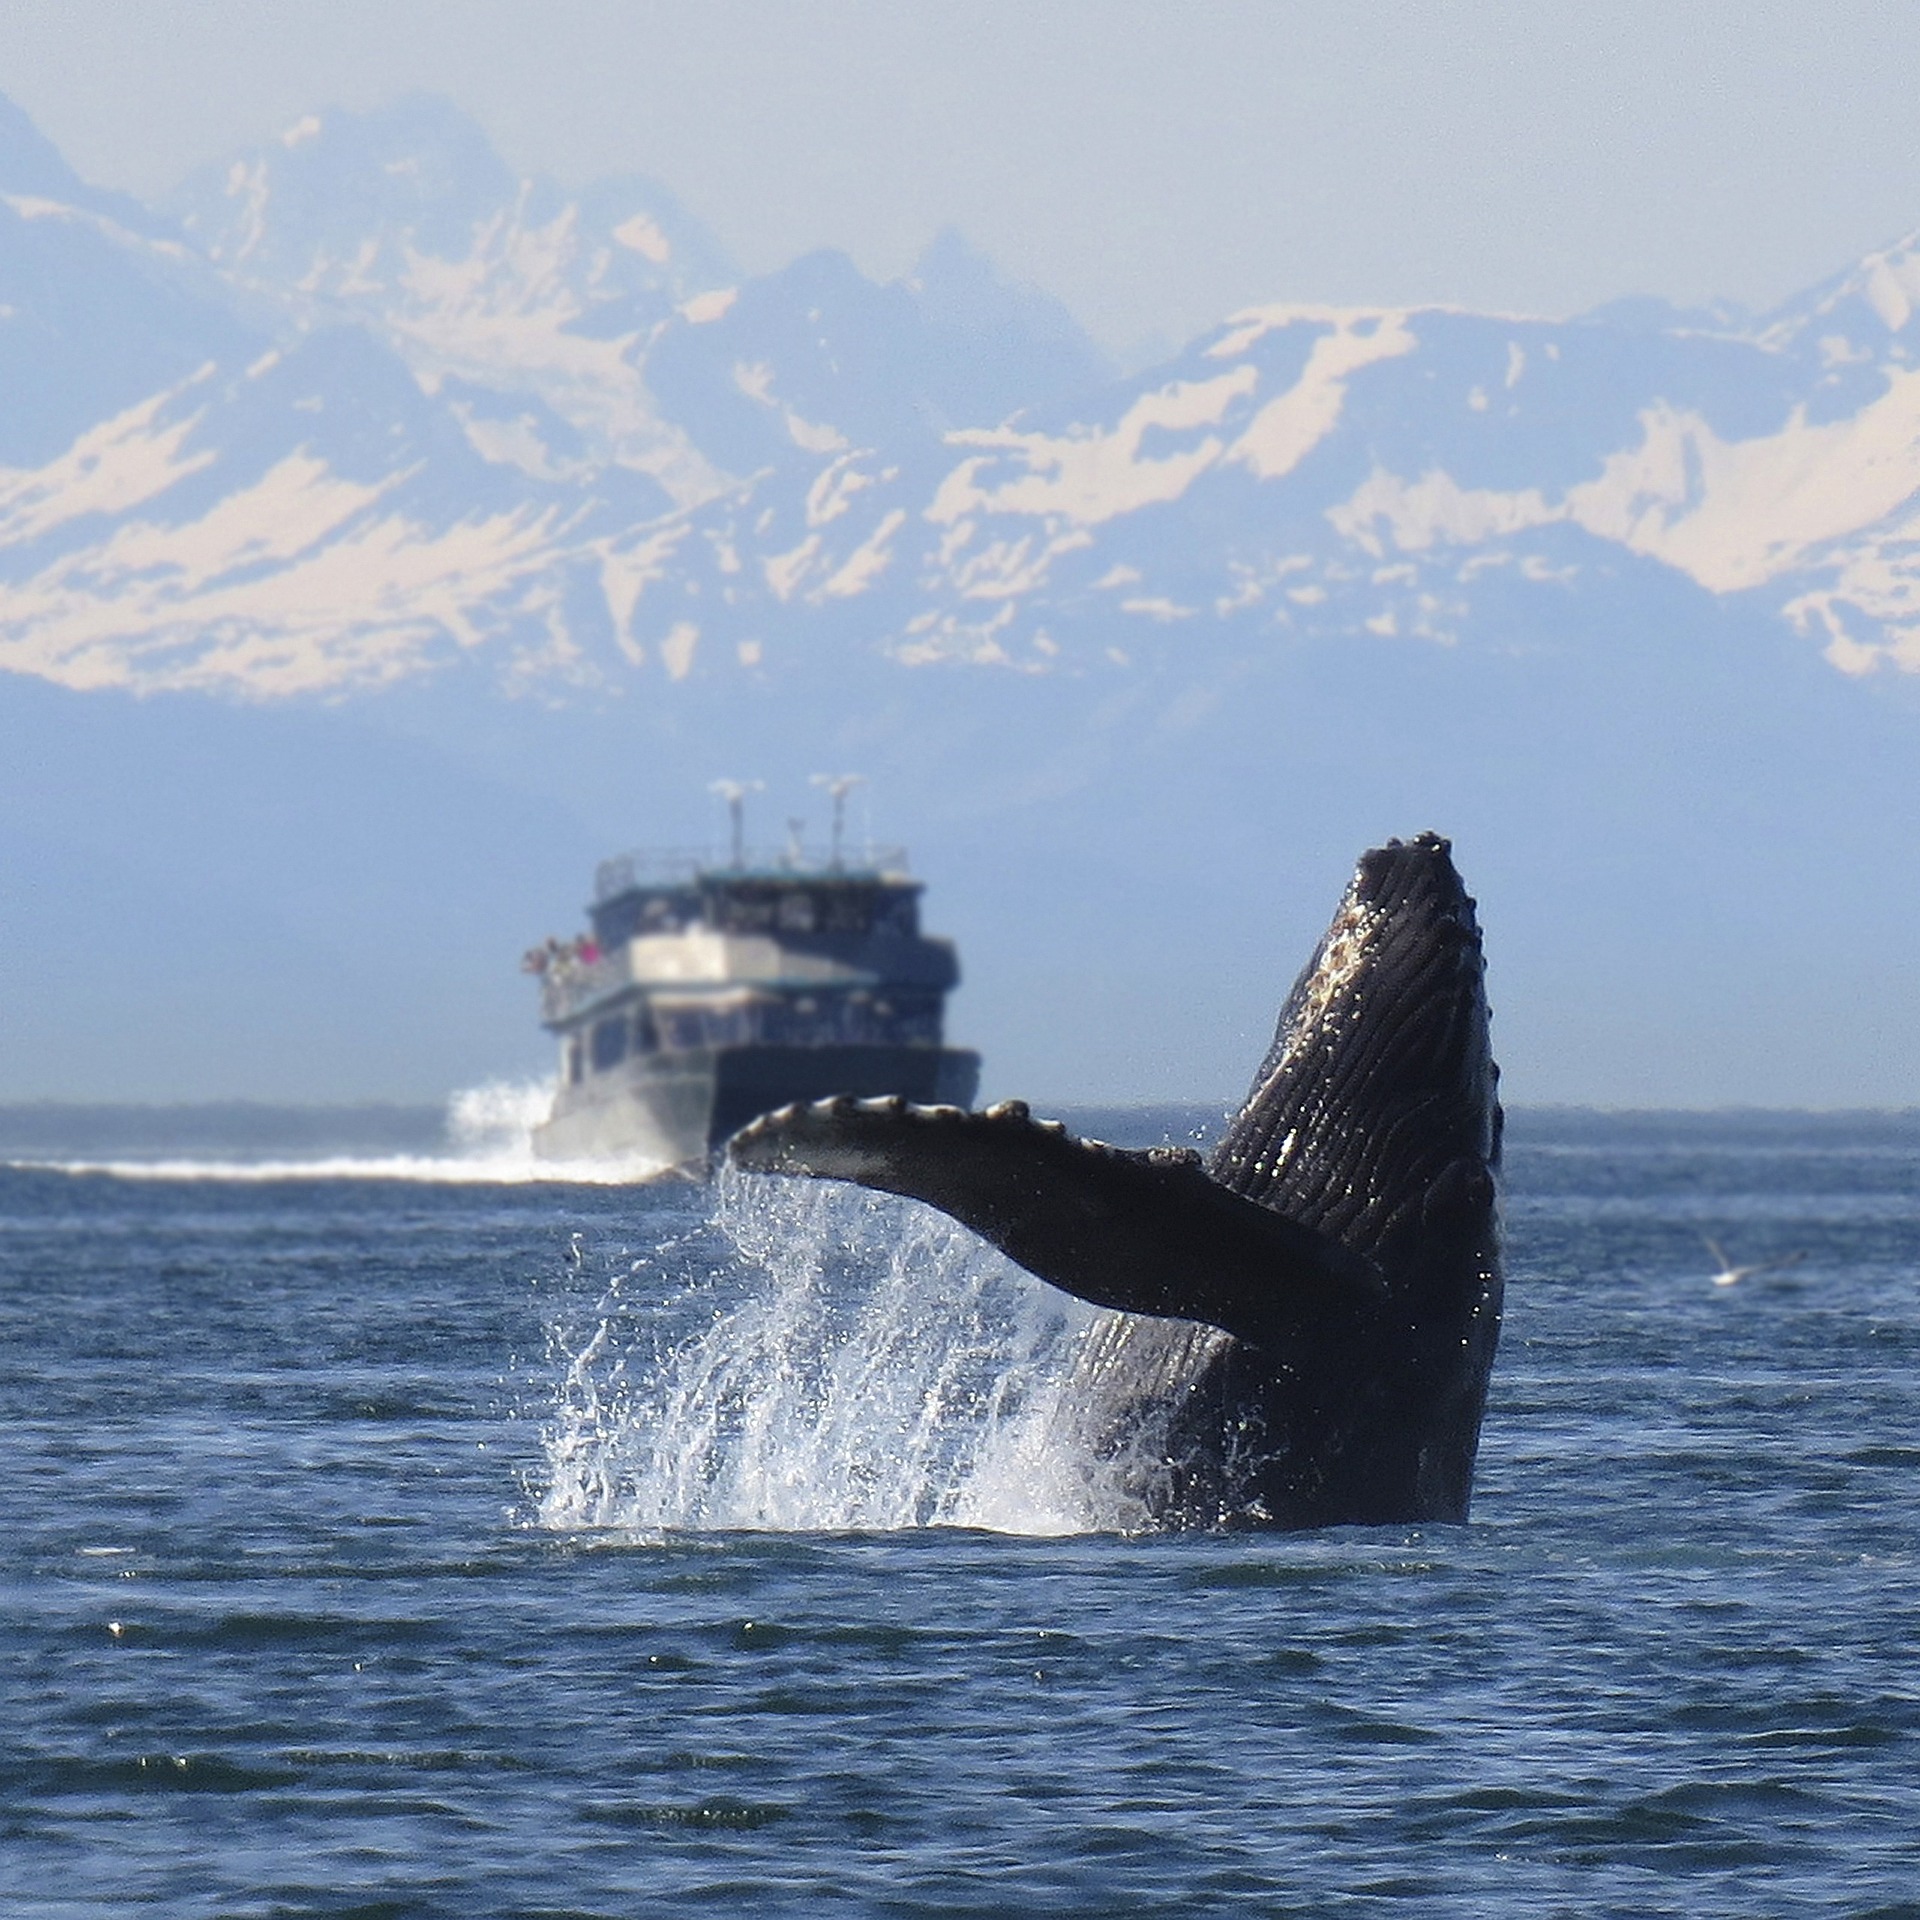 humpback whale breaching the ocean in front of a large boat with mountains in the distance